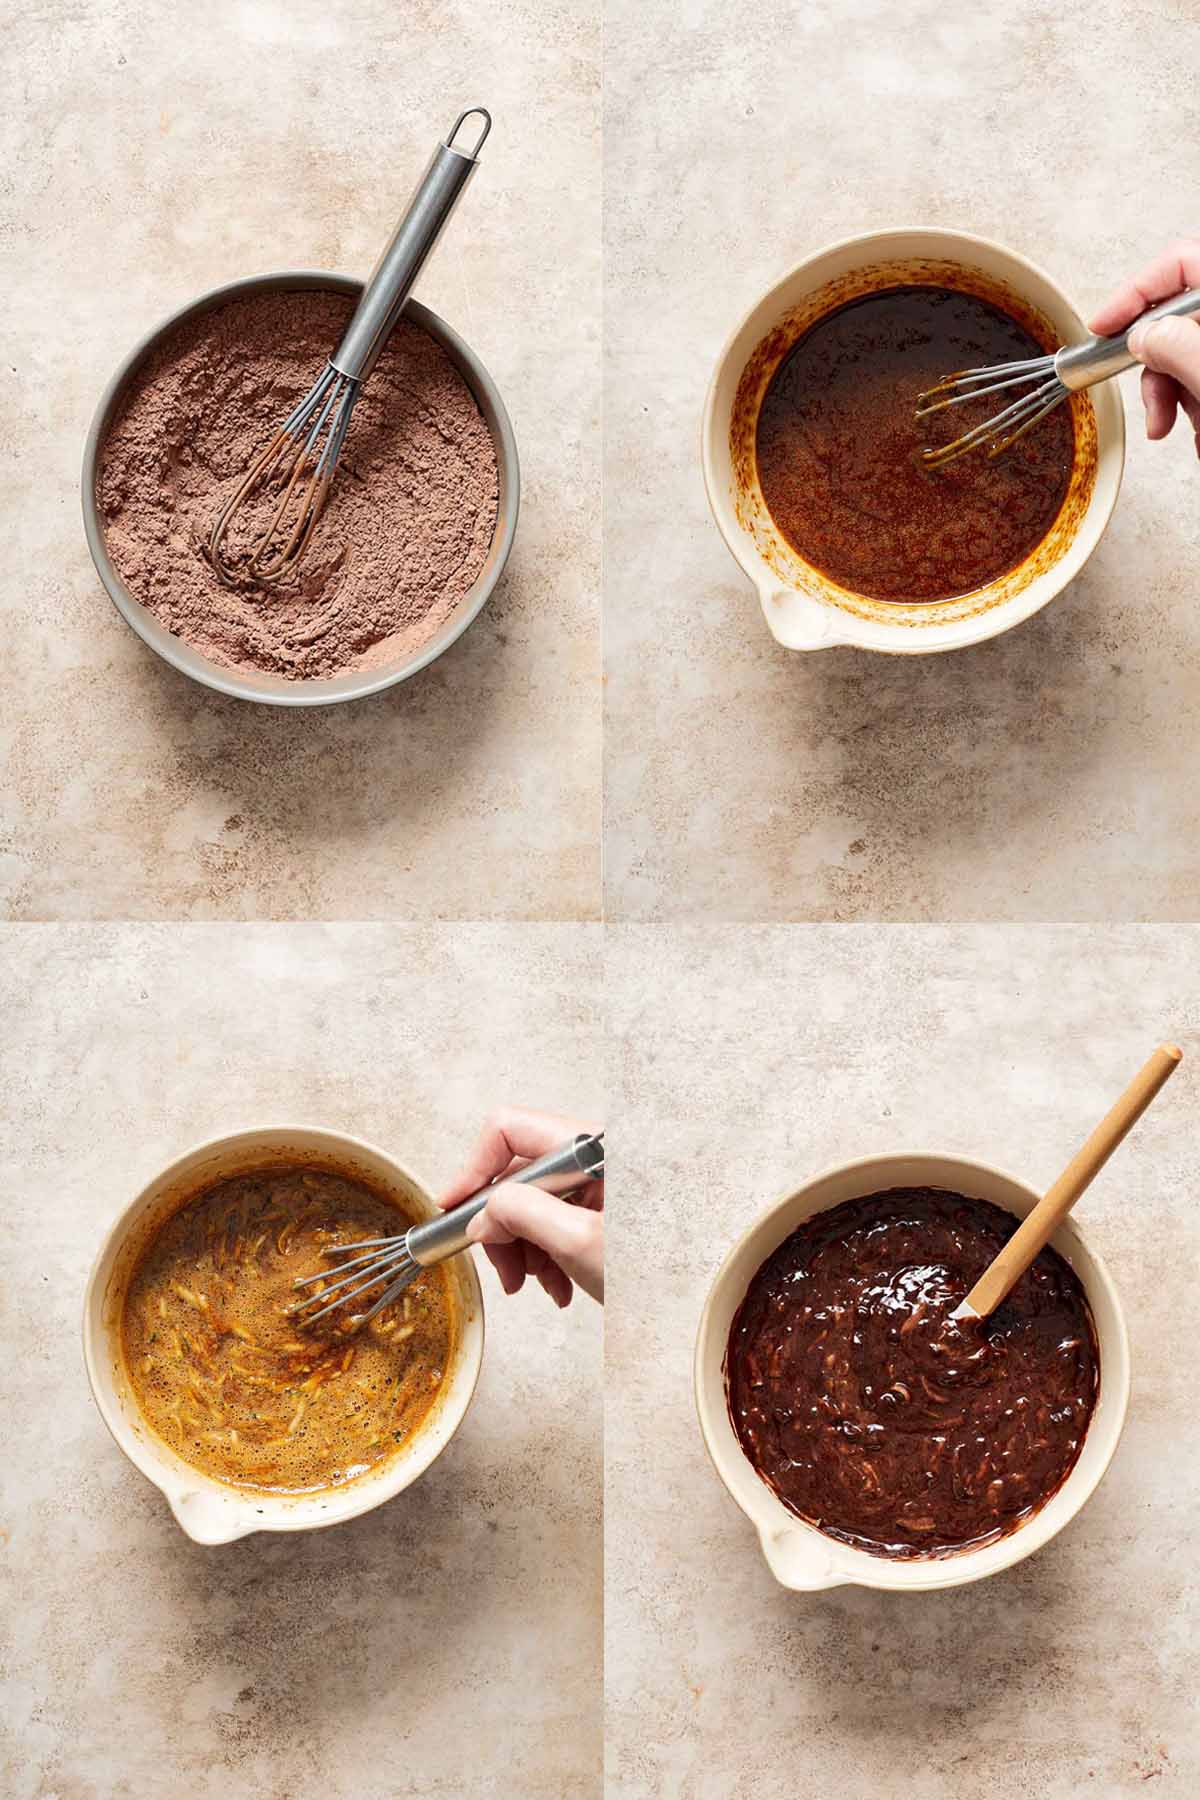 Collage of 4 images demonstrating how the dry ingredients and wet mixture come together to make the cupcake batter.